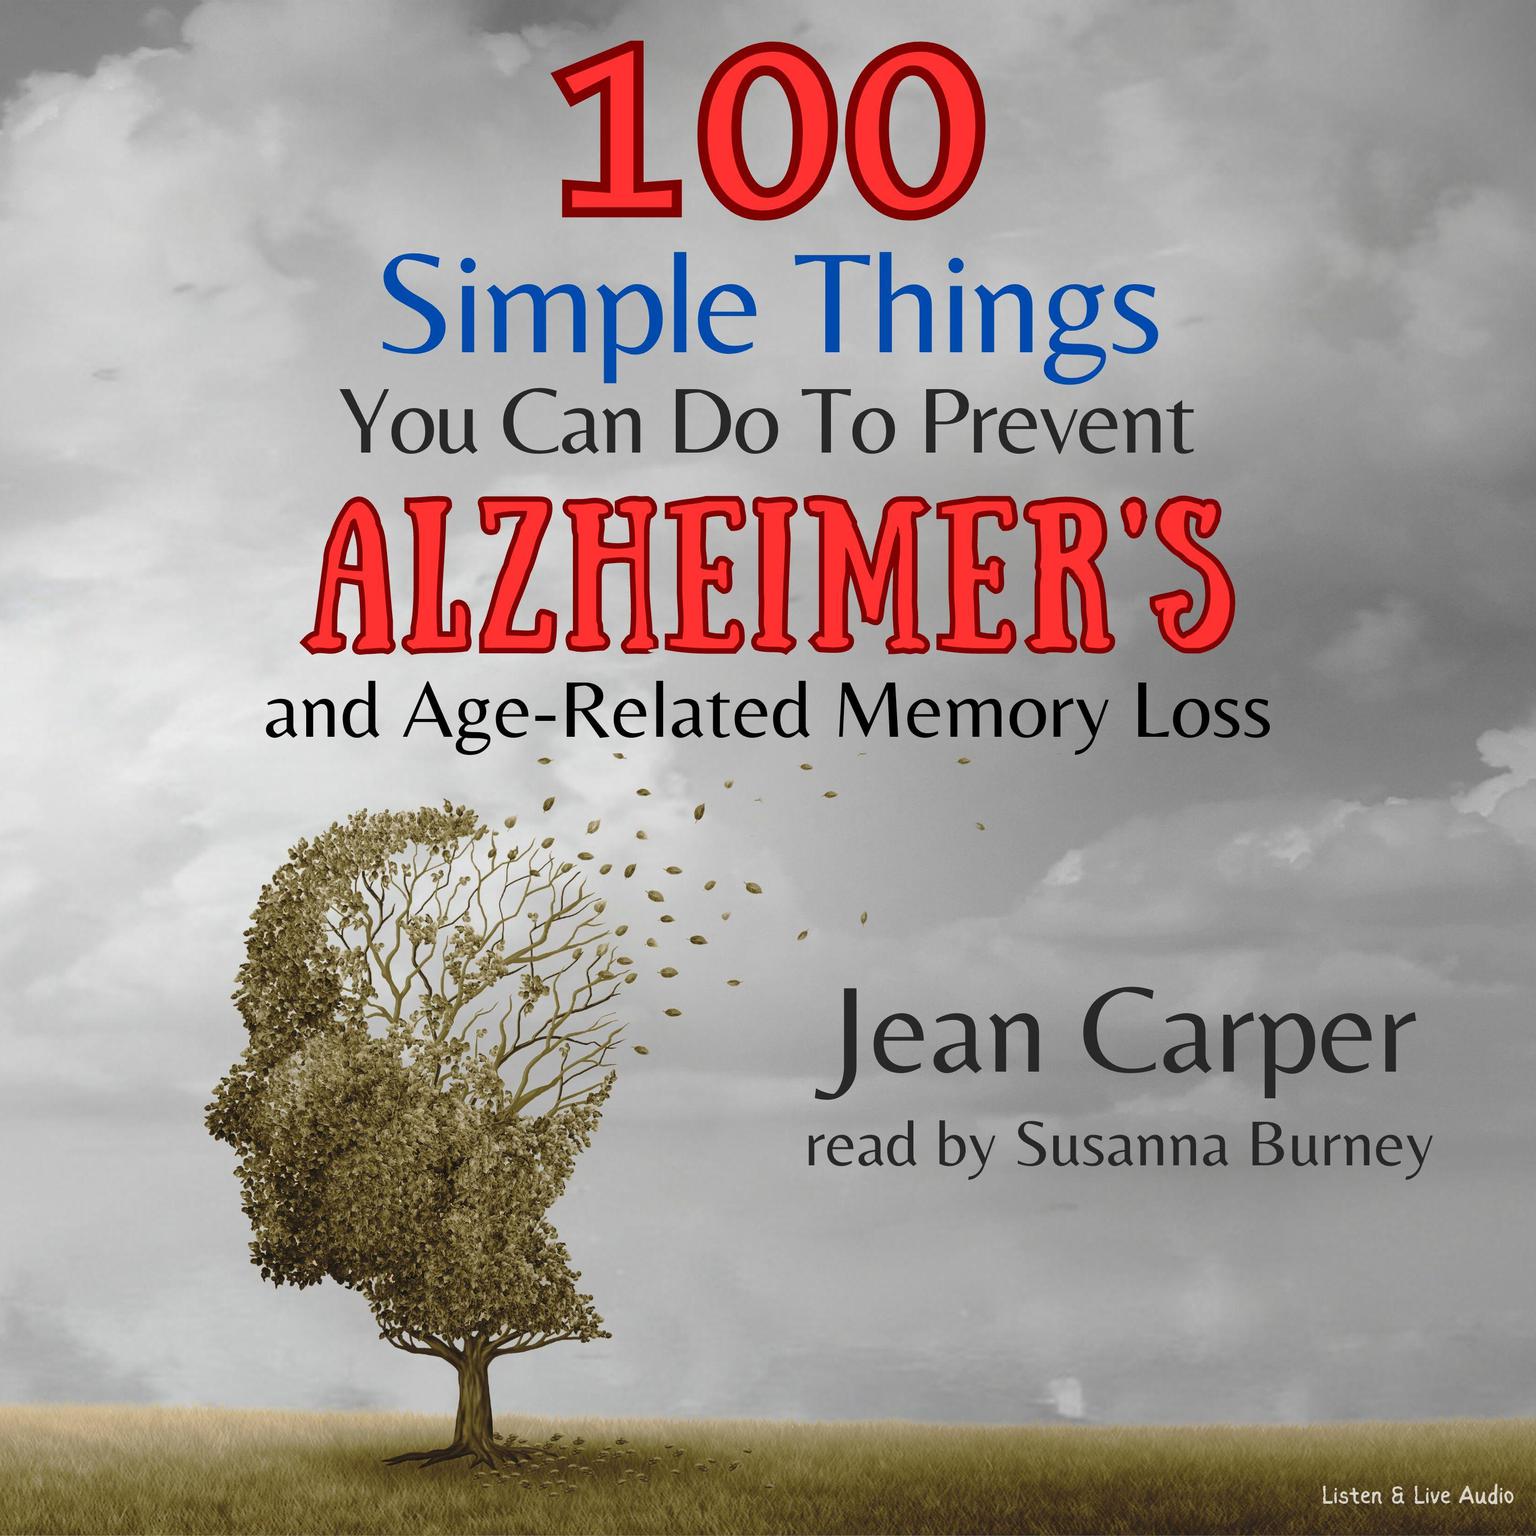 100 Simple Things You Can Do To Prevent Alzheimer’s and Age-Related Memory Loss (Abridged) Audiobook, by Jean Carper